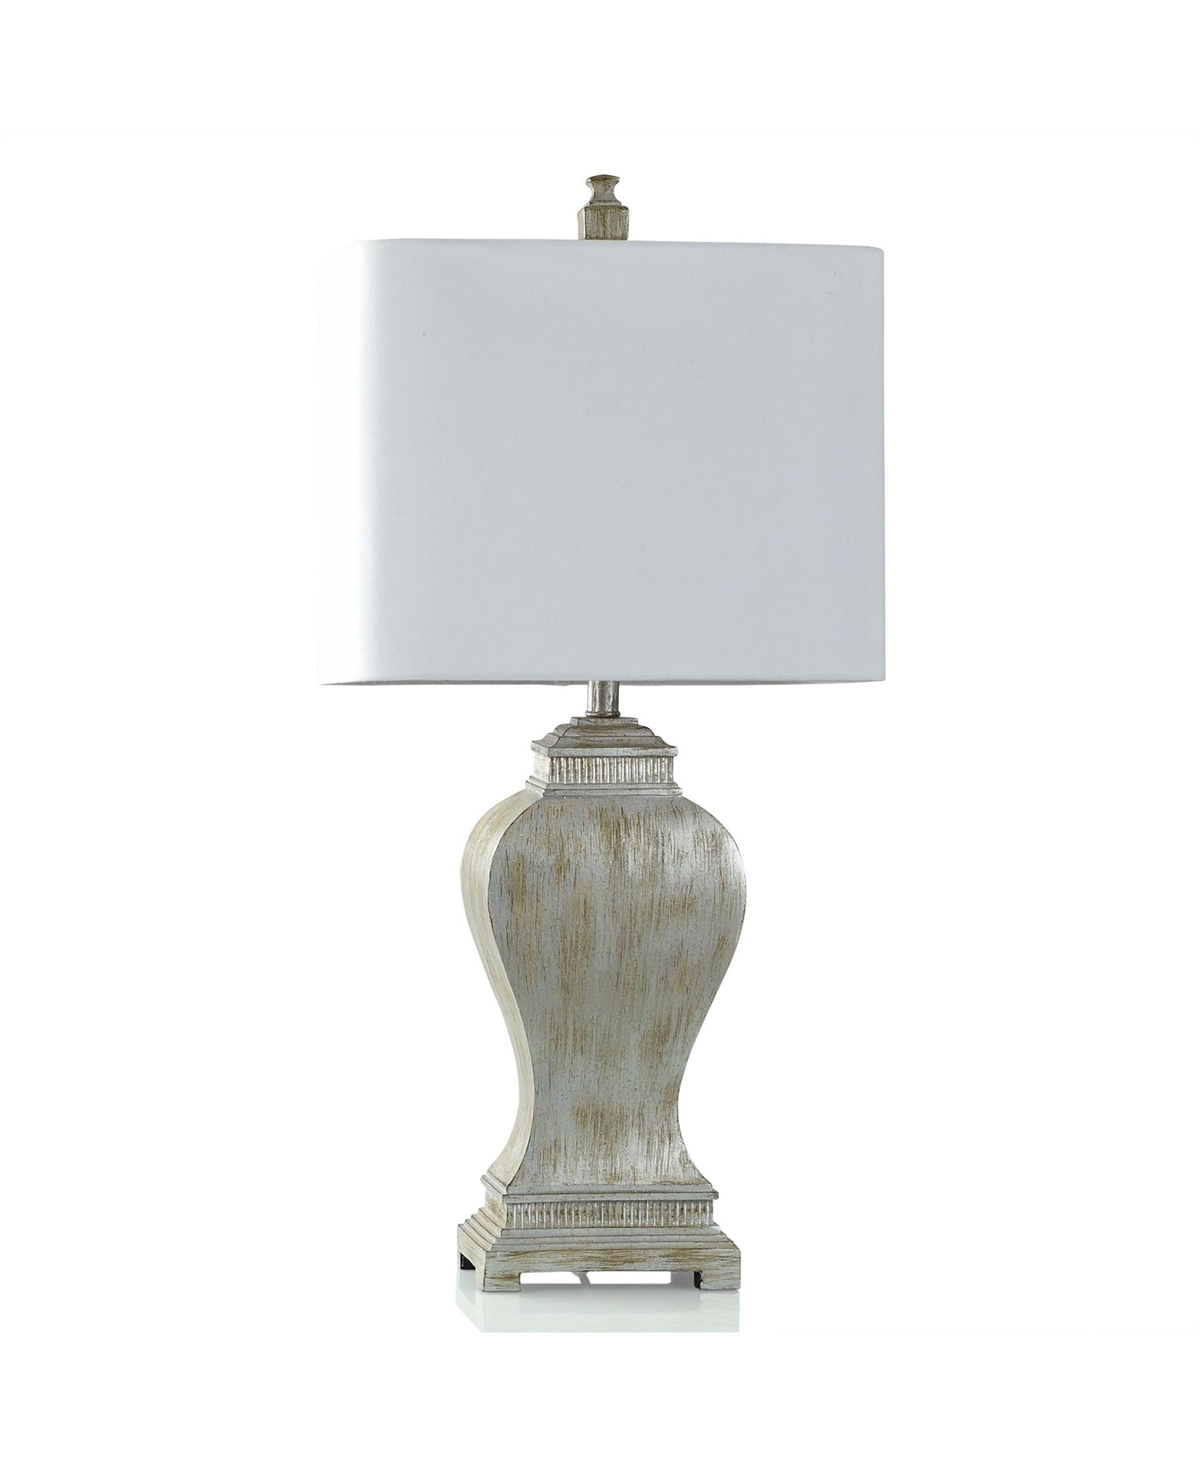 Stylecraft Home Collection 33.5" Carme Metallic Brushed Table Lamp In Washed Cream,silver And Brown Metallic